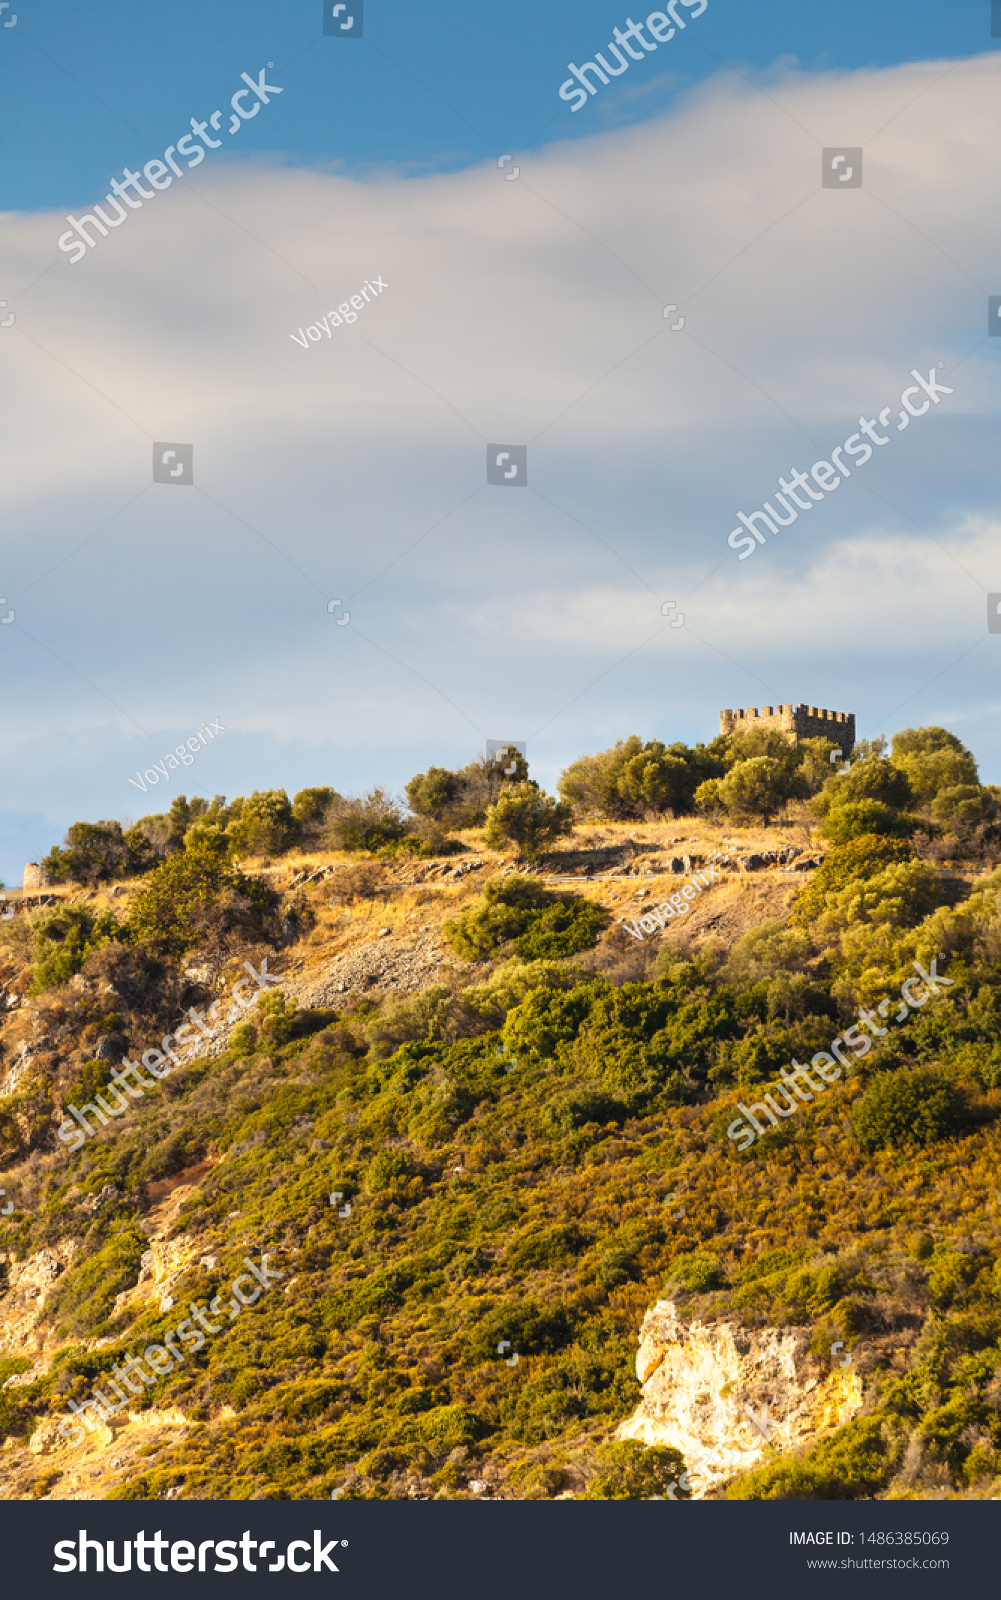 Greek idyllic hills with small shrubs of Mediterranean flora and little castle against cloudy sky. #1486385069